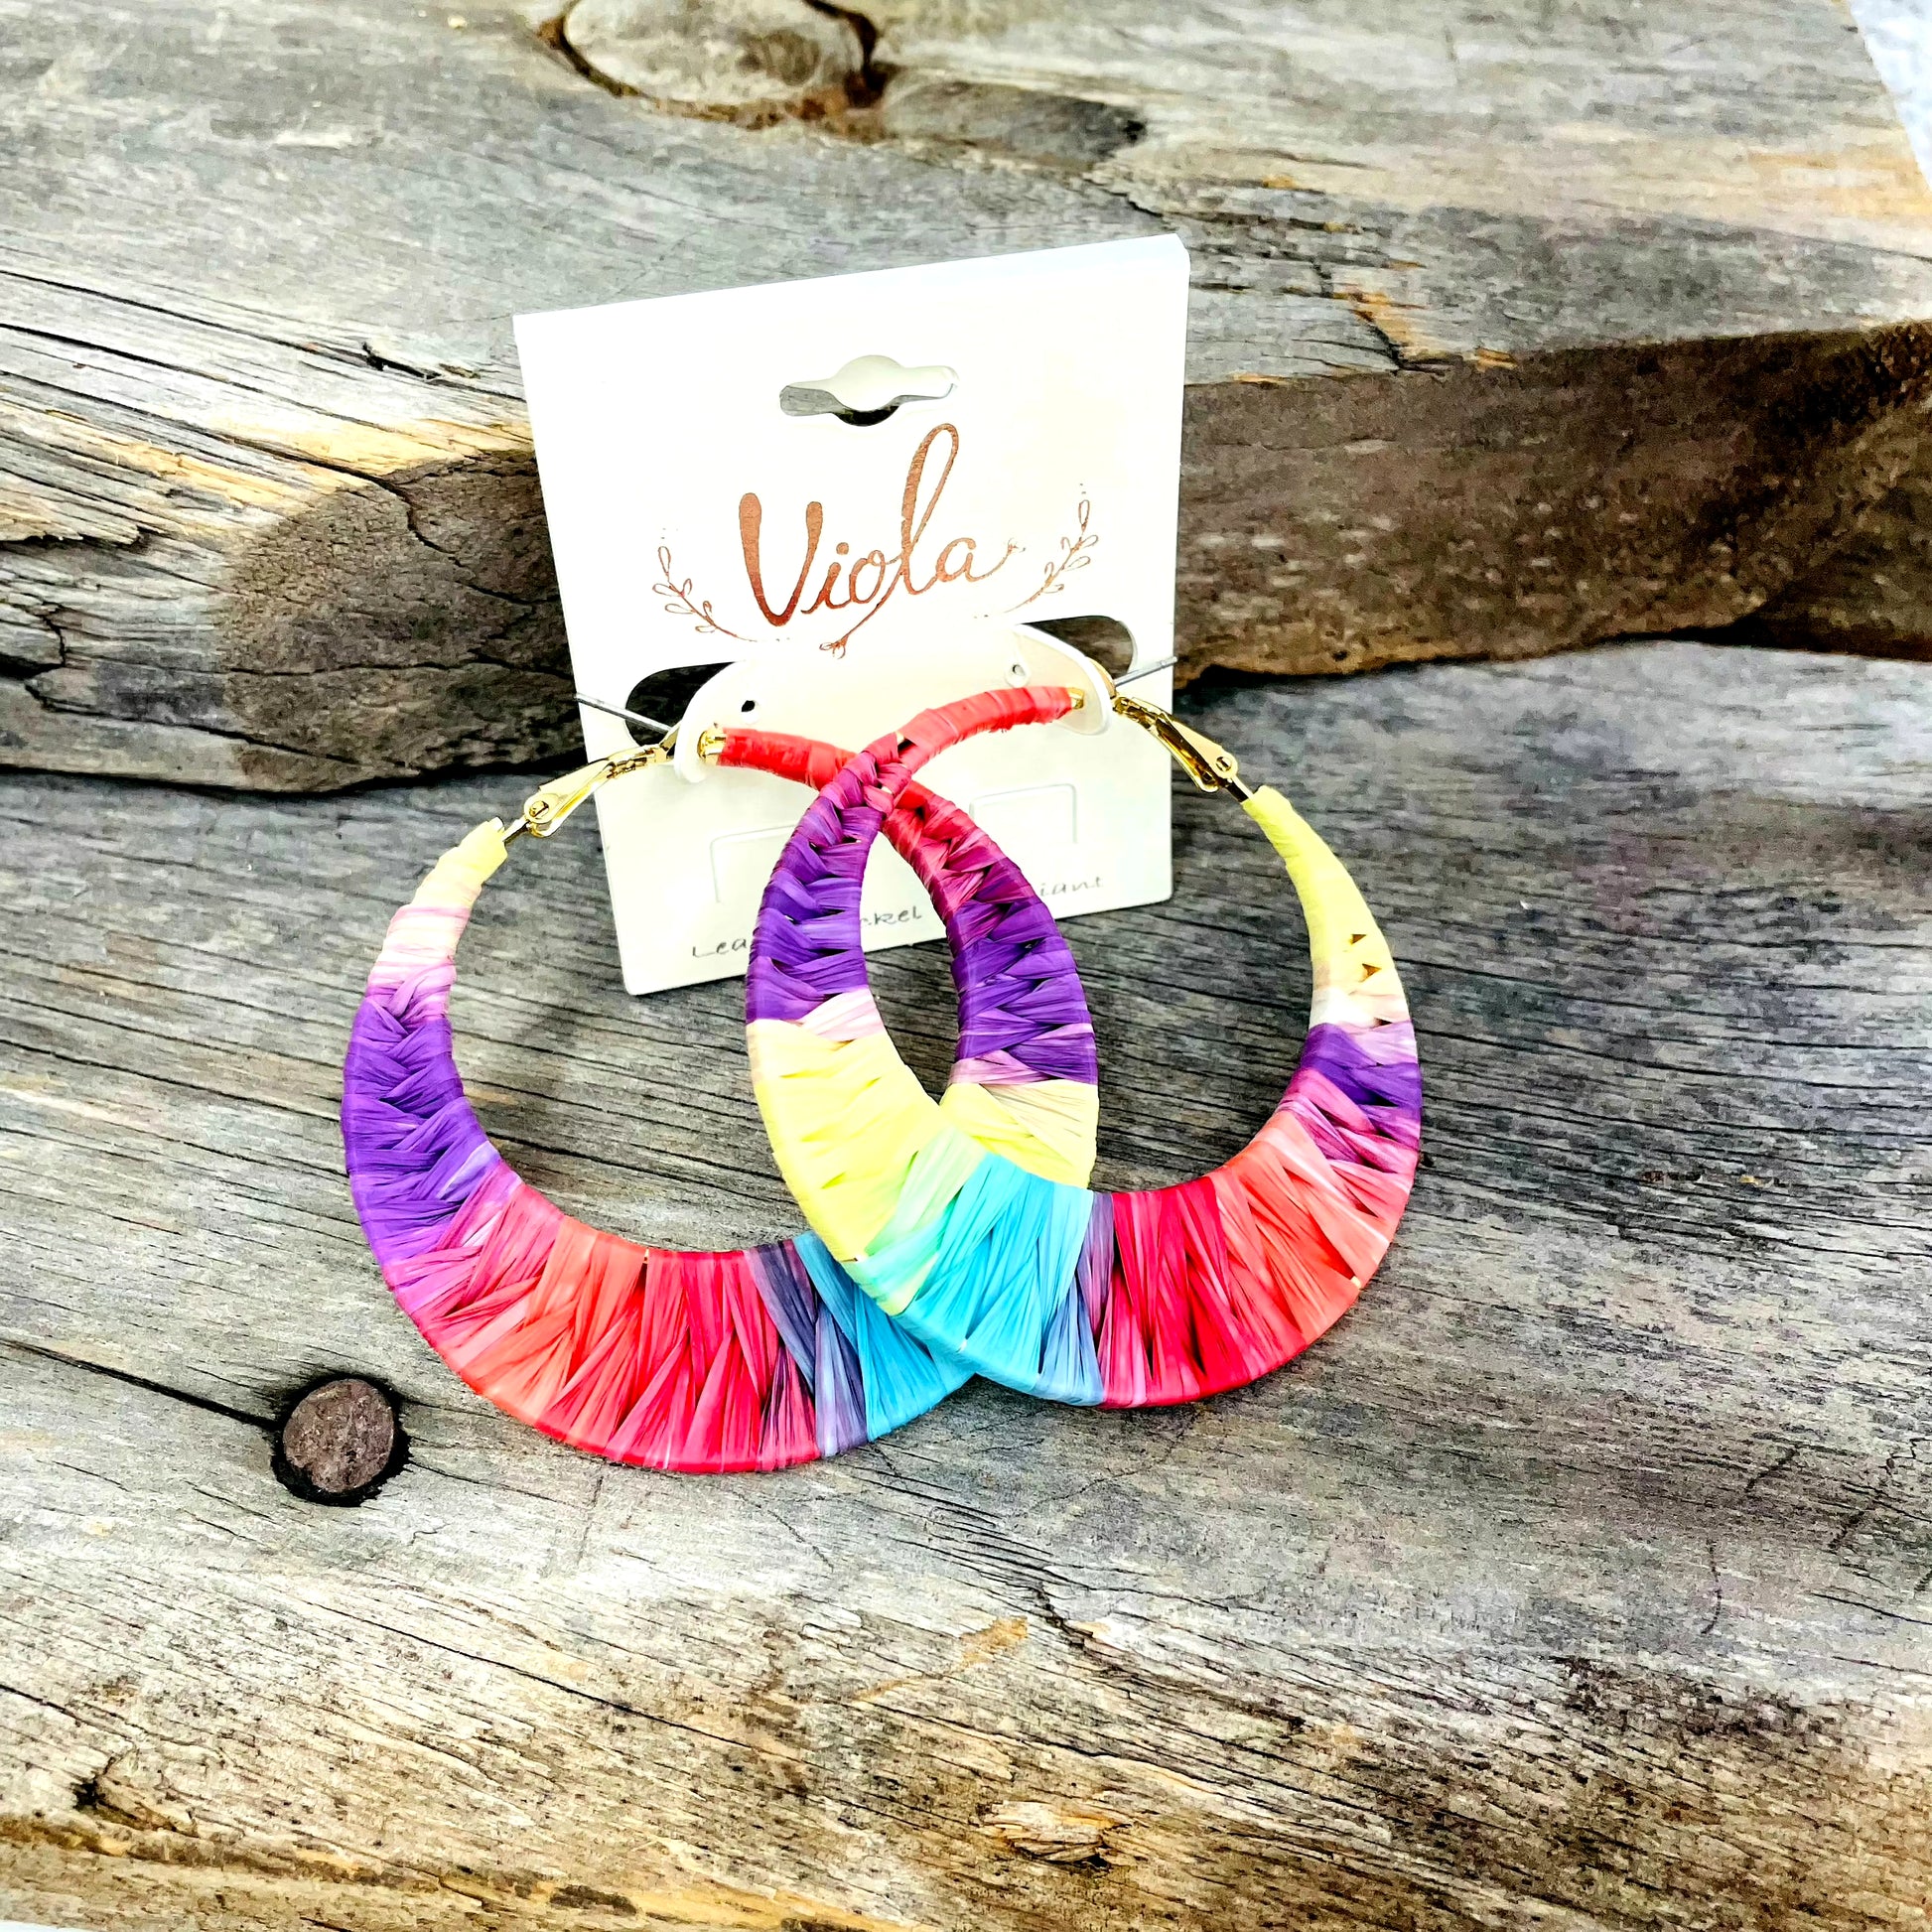                                                   Tie Dye Hoop Earring  Add a very much needed colorful piece to your outfit and you will shine!   tie dye hoop  lead and nickel compliant Tea Shirt Shoppe 417-262-8828